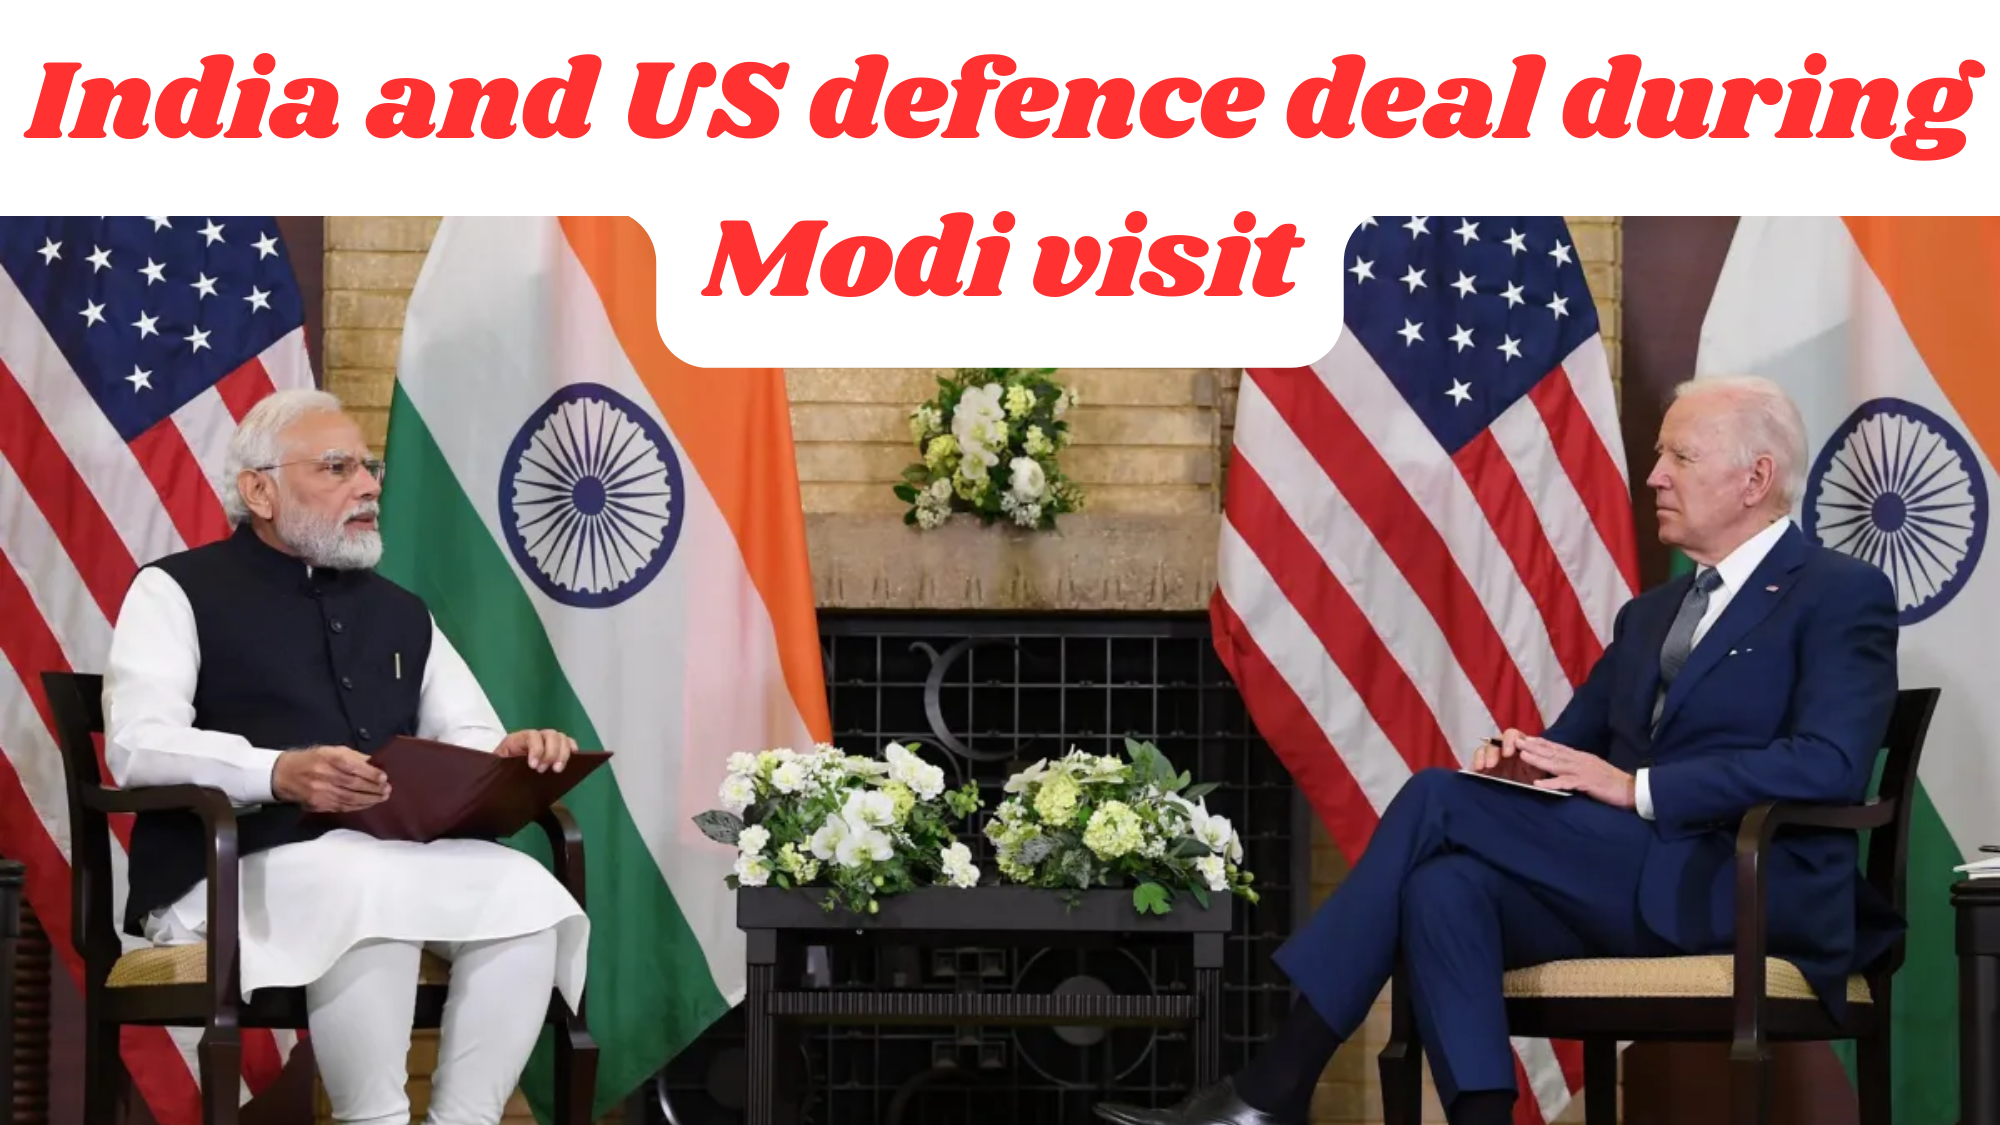 India and US defence deal during Modi visit